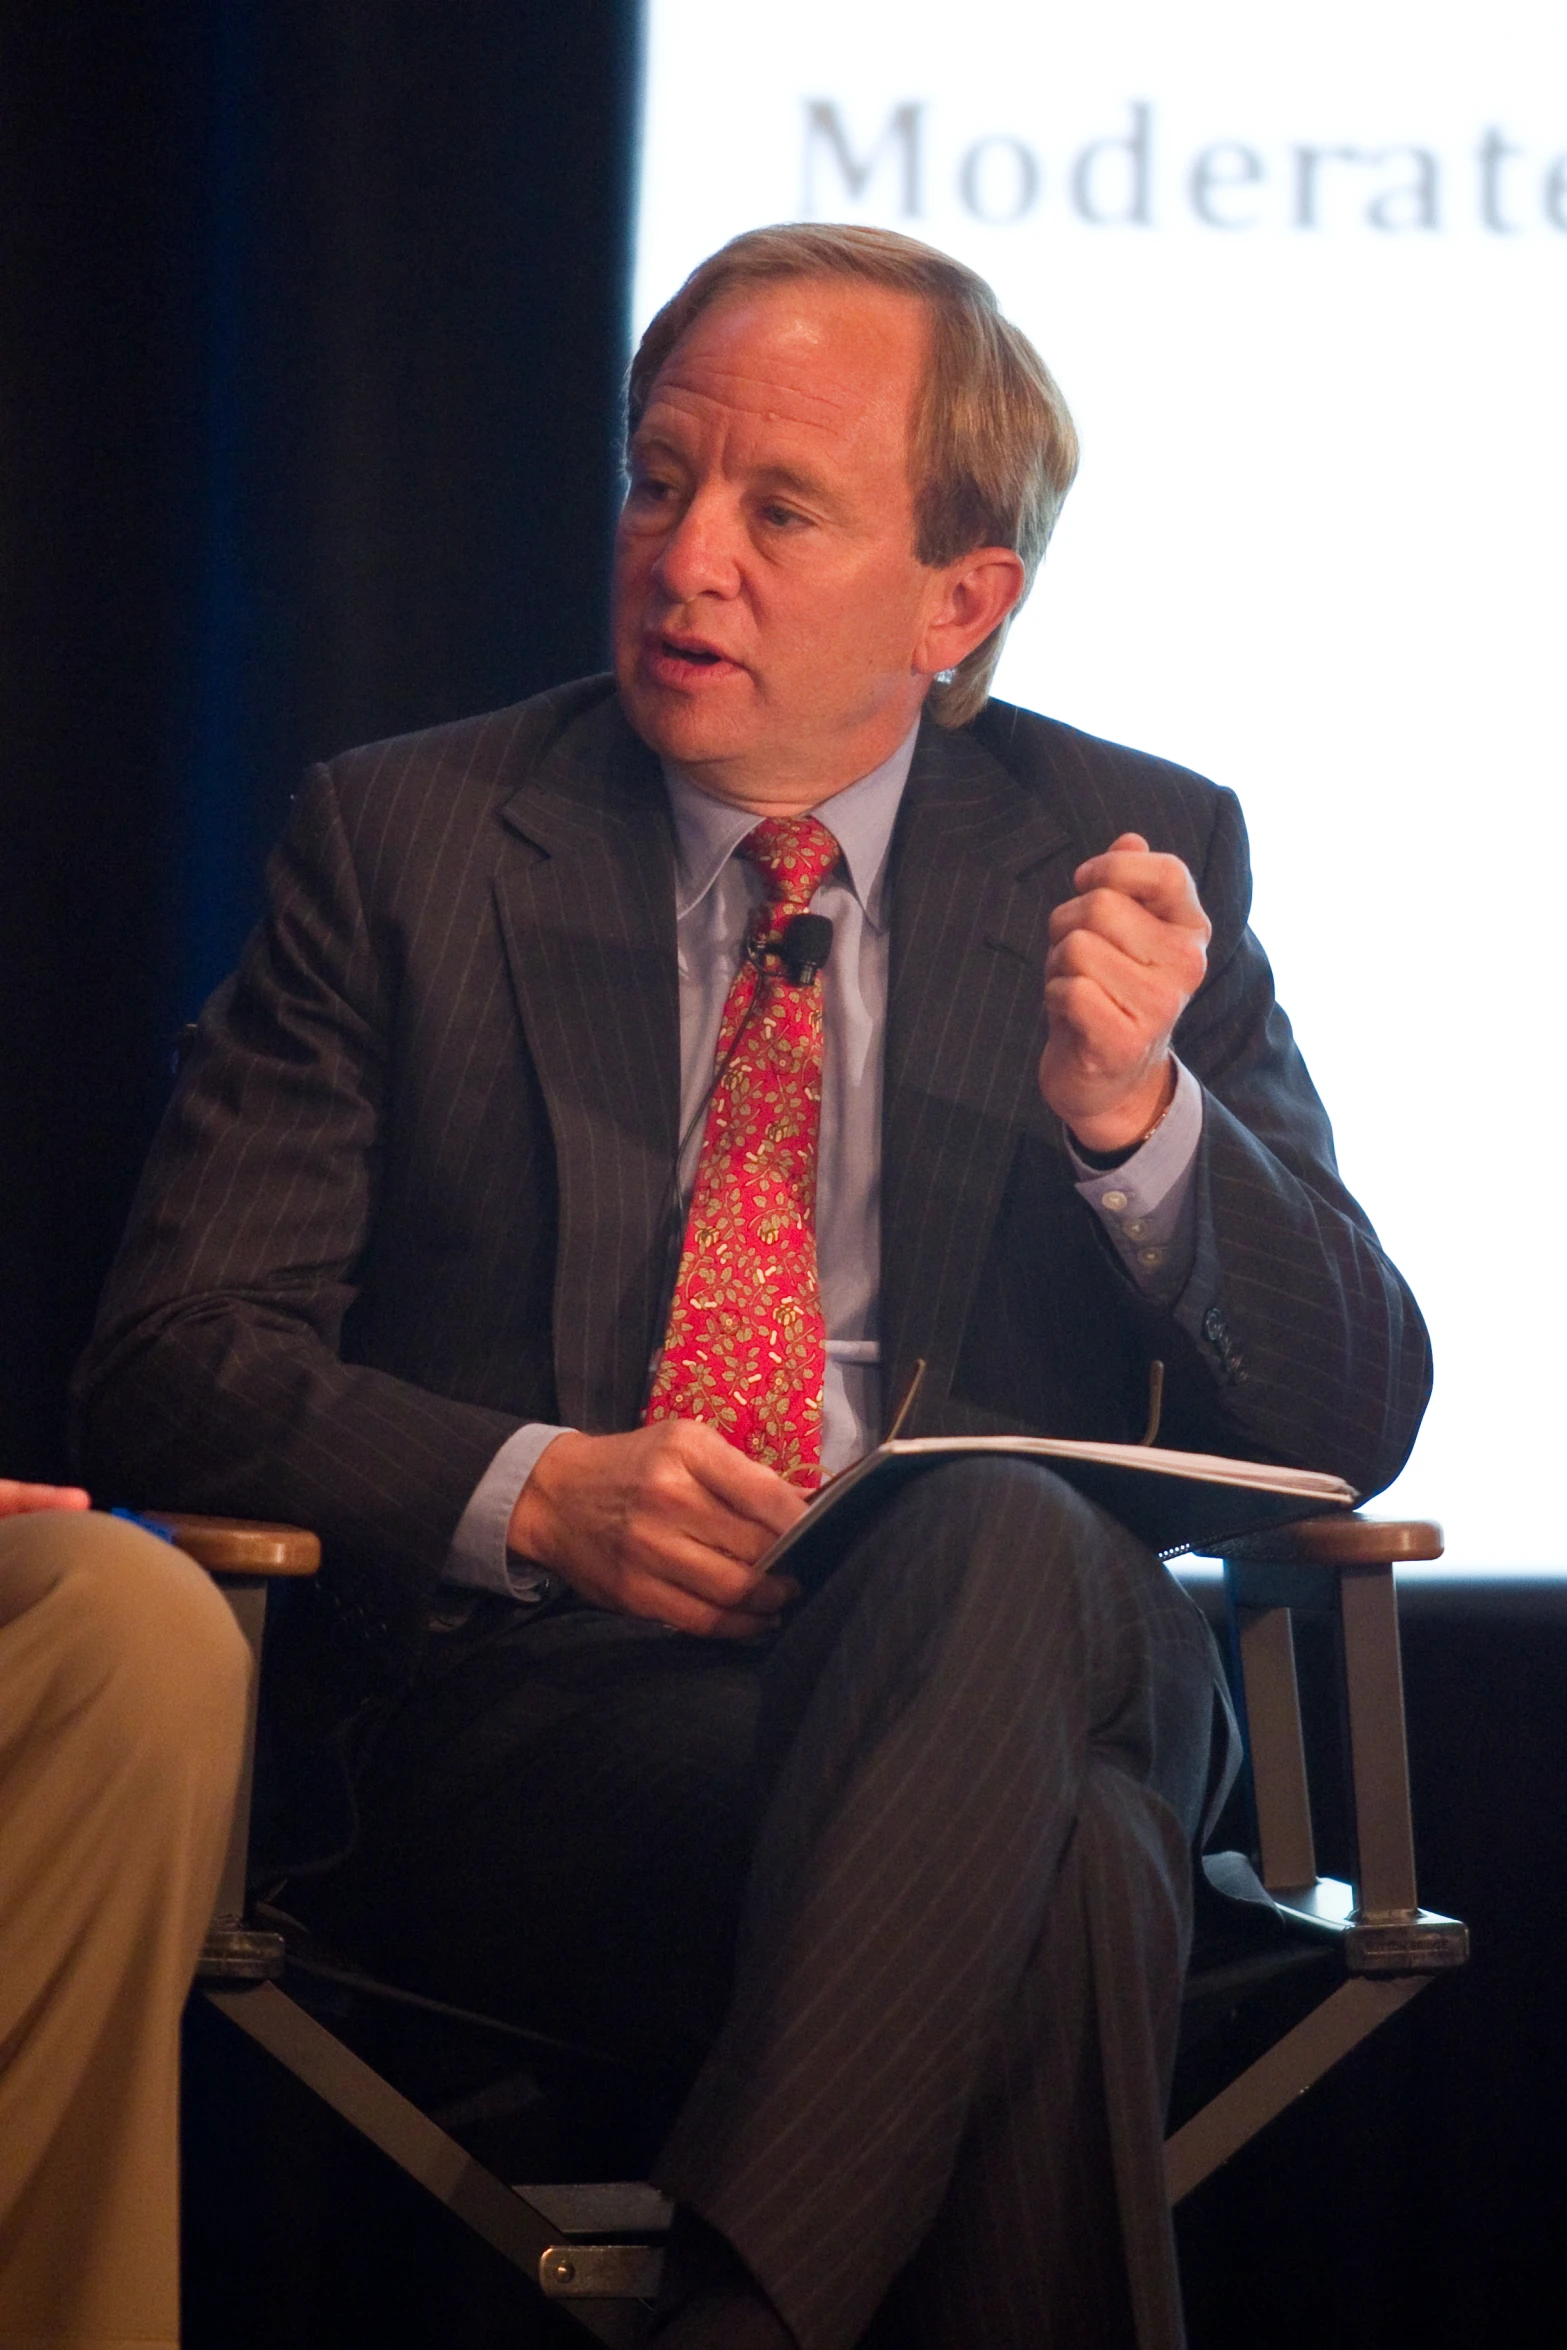 a man with a red tie talking in front of a projection screen